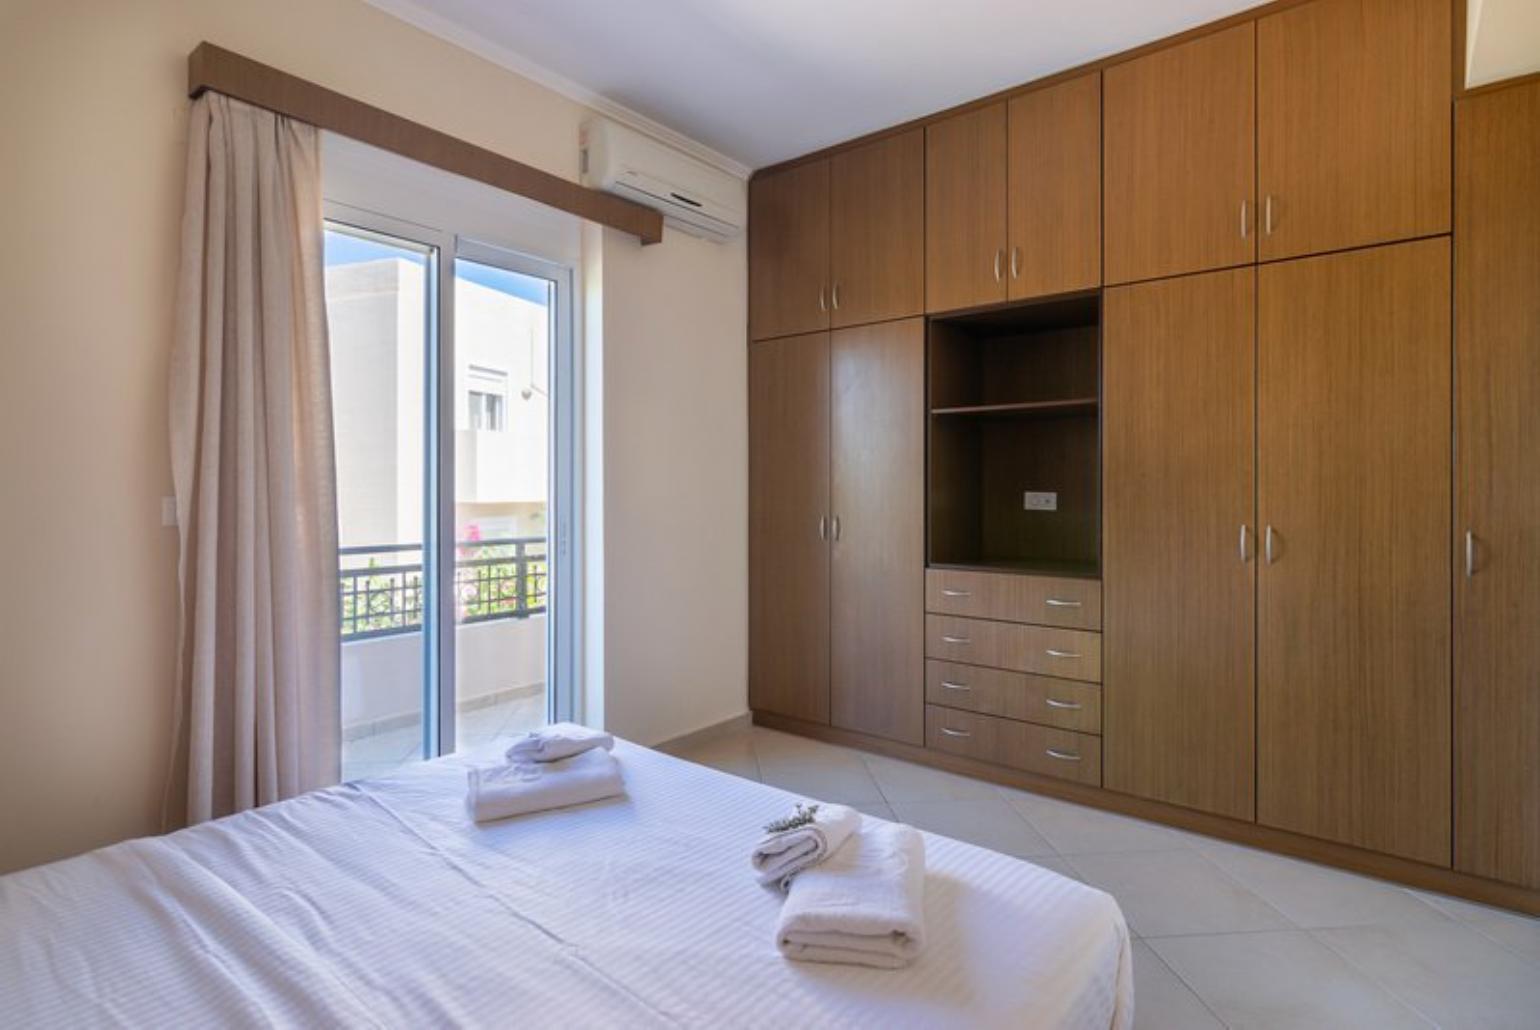 Double bedroom with balcony access